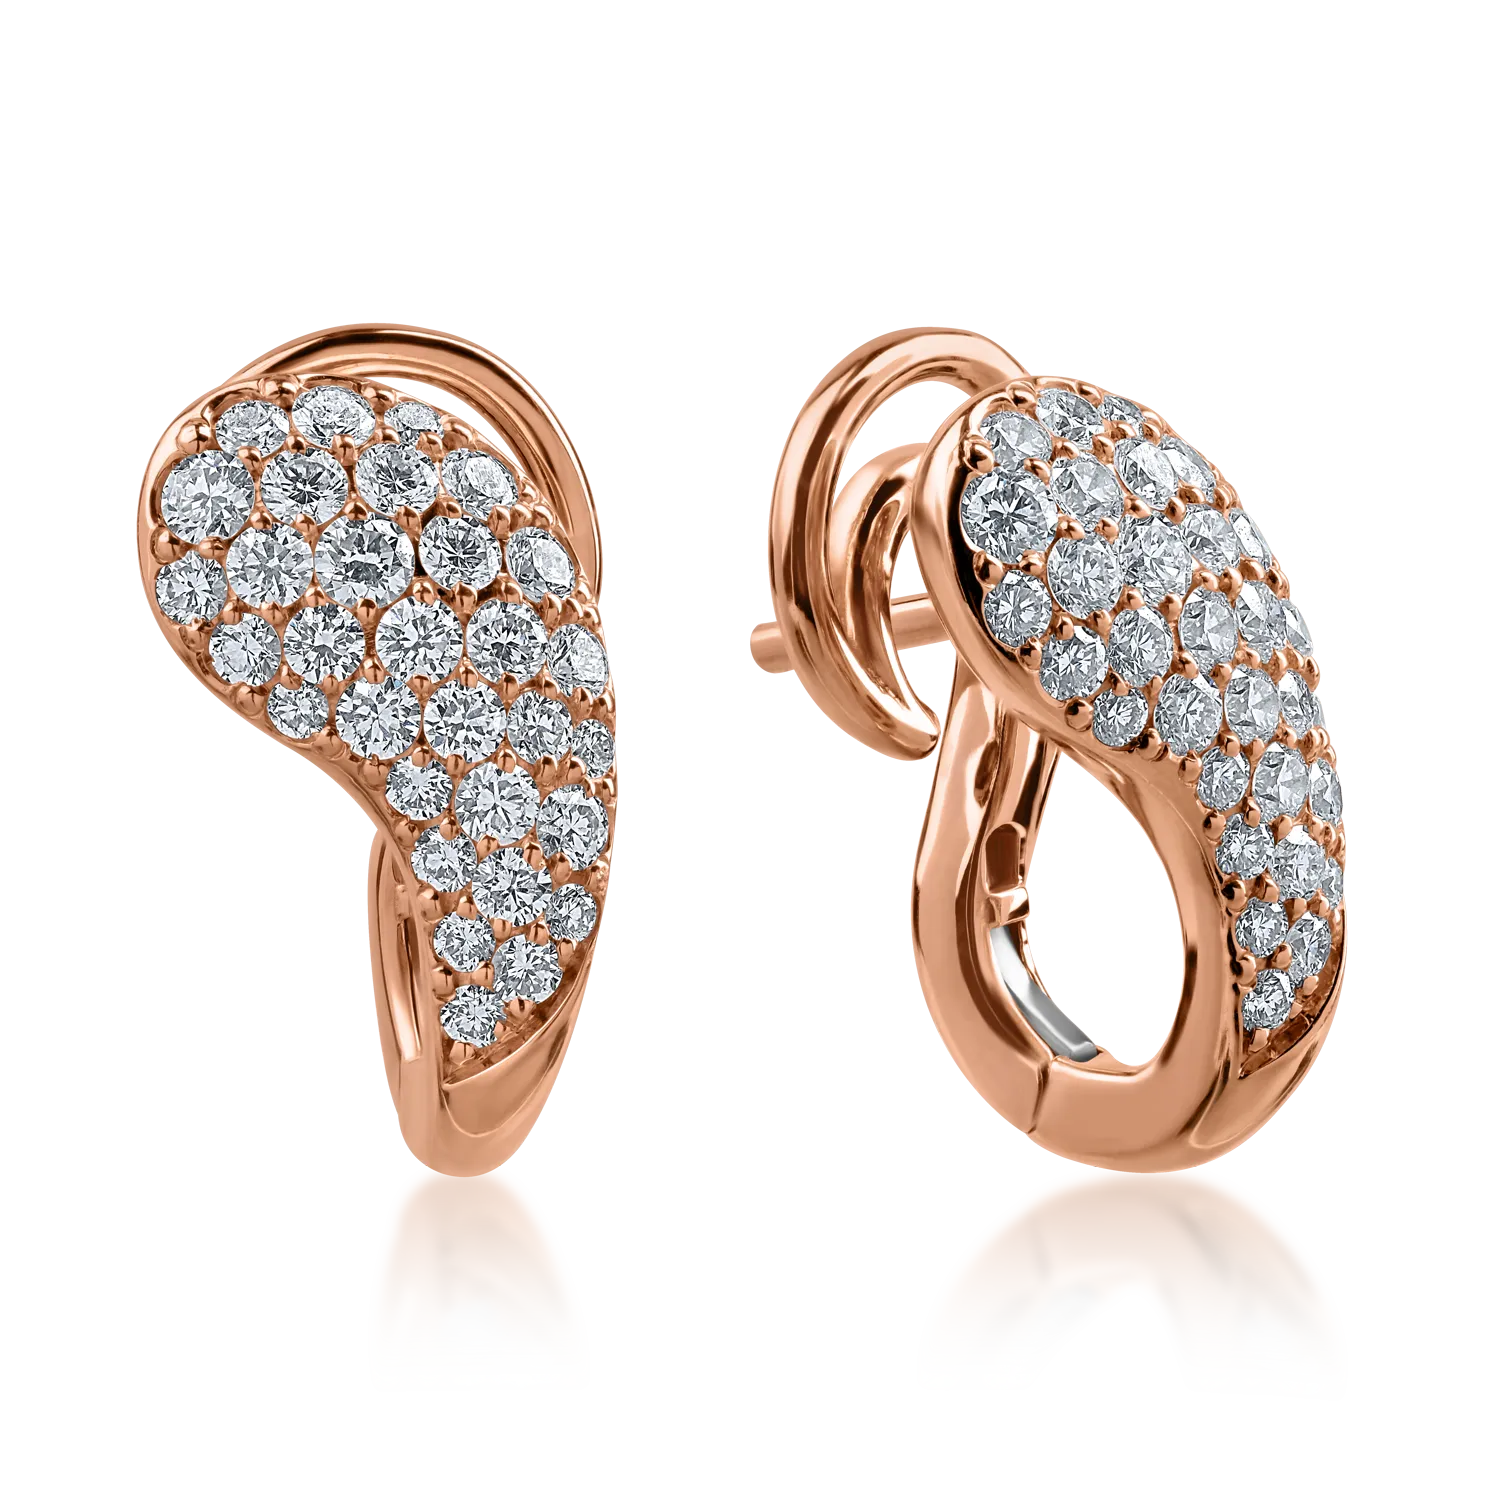 Rose gold earrings with 0.88ct diamonds